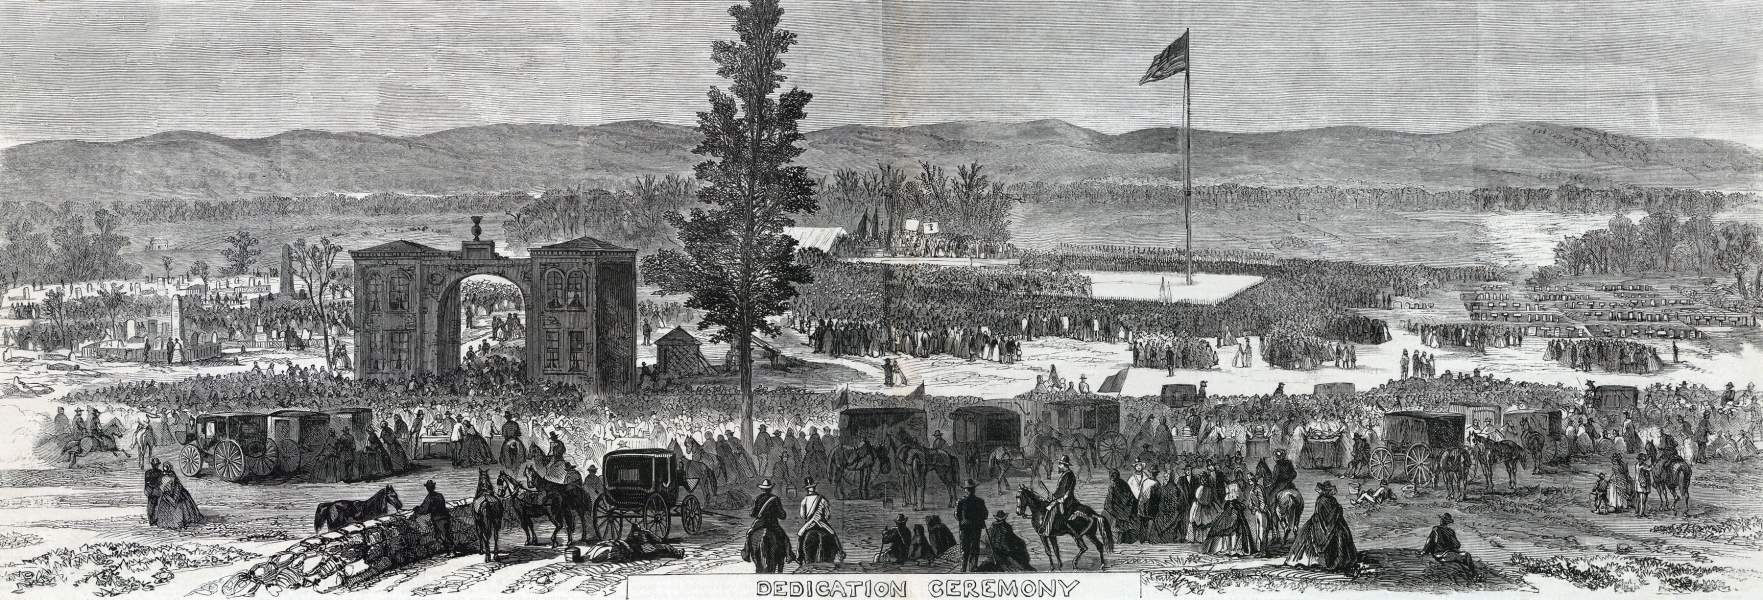 Dedication of the Soldiers' National Cemetery, Gettysburg, Pennsylvania, November 19, 1863, artist's impression, zoomable image